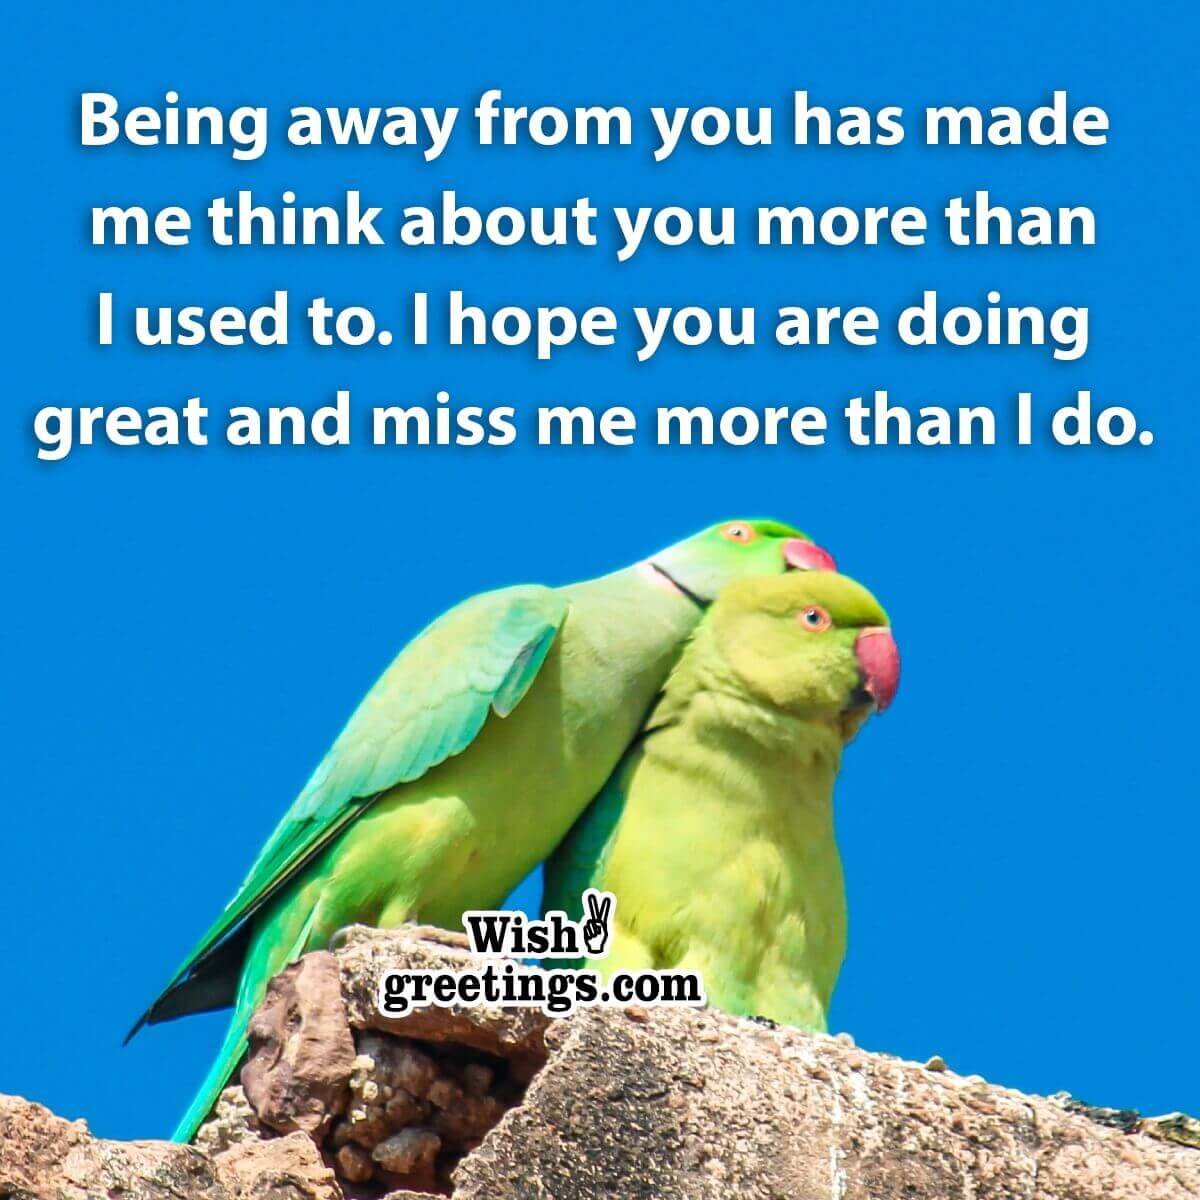 Missing You Message Image